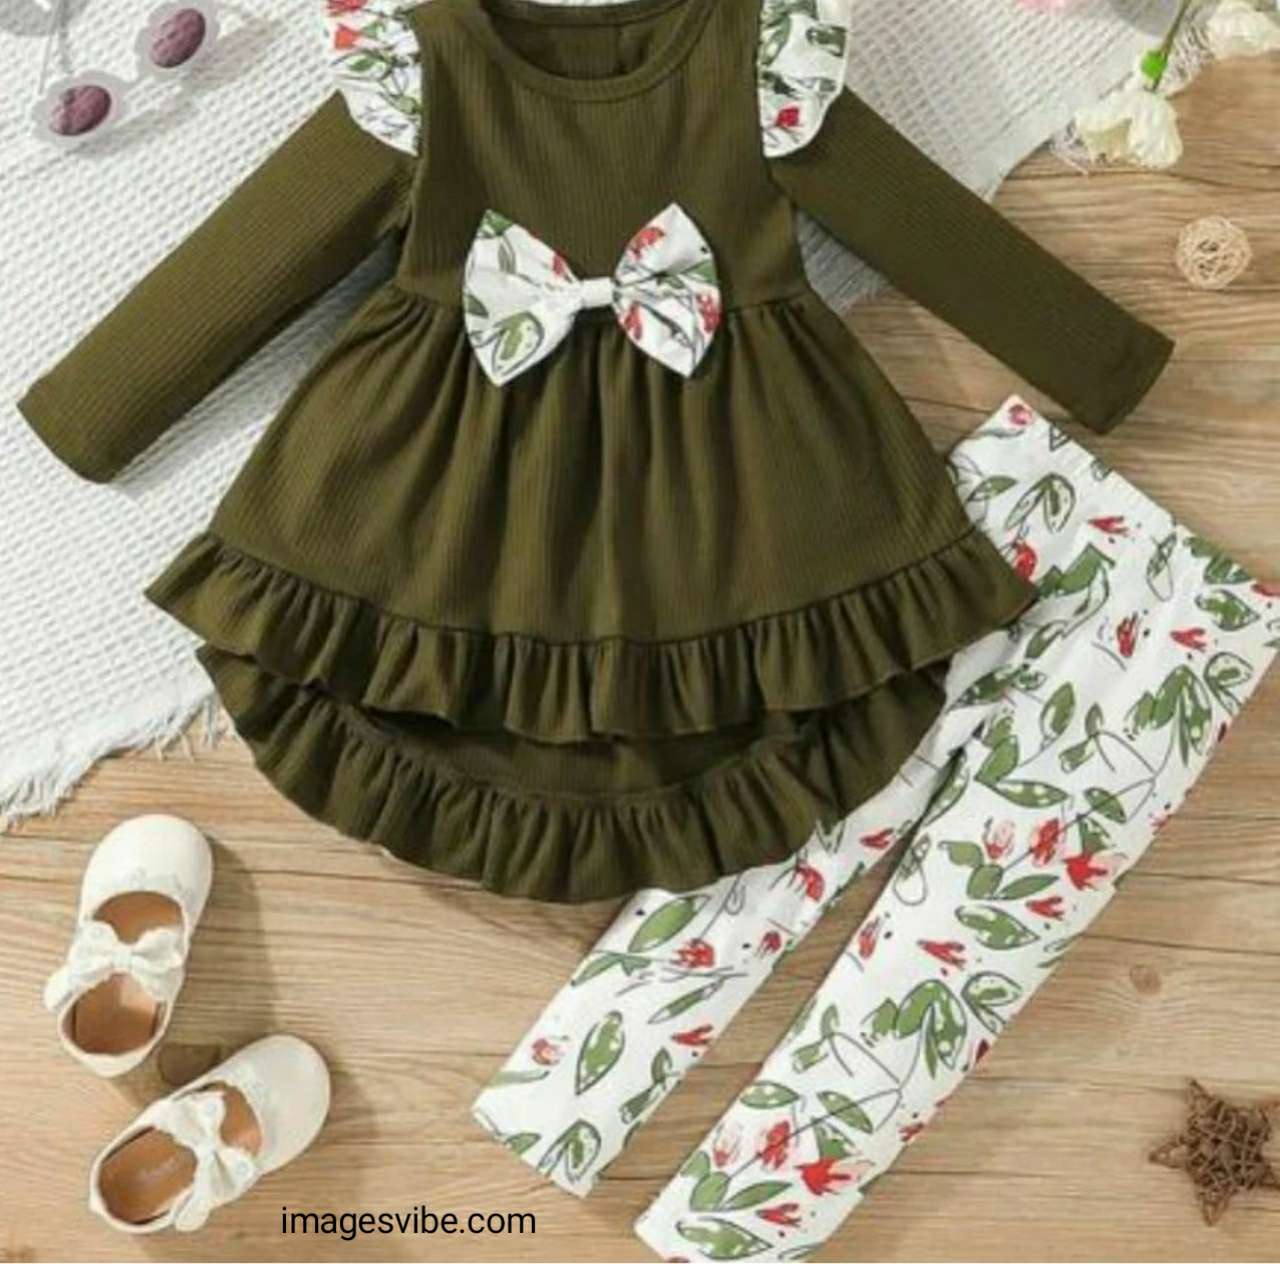 Buy Indian Baby Frock Online In India - Etsy India-thanhphatduhoc.com.vn